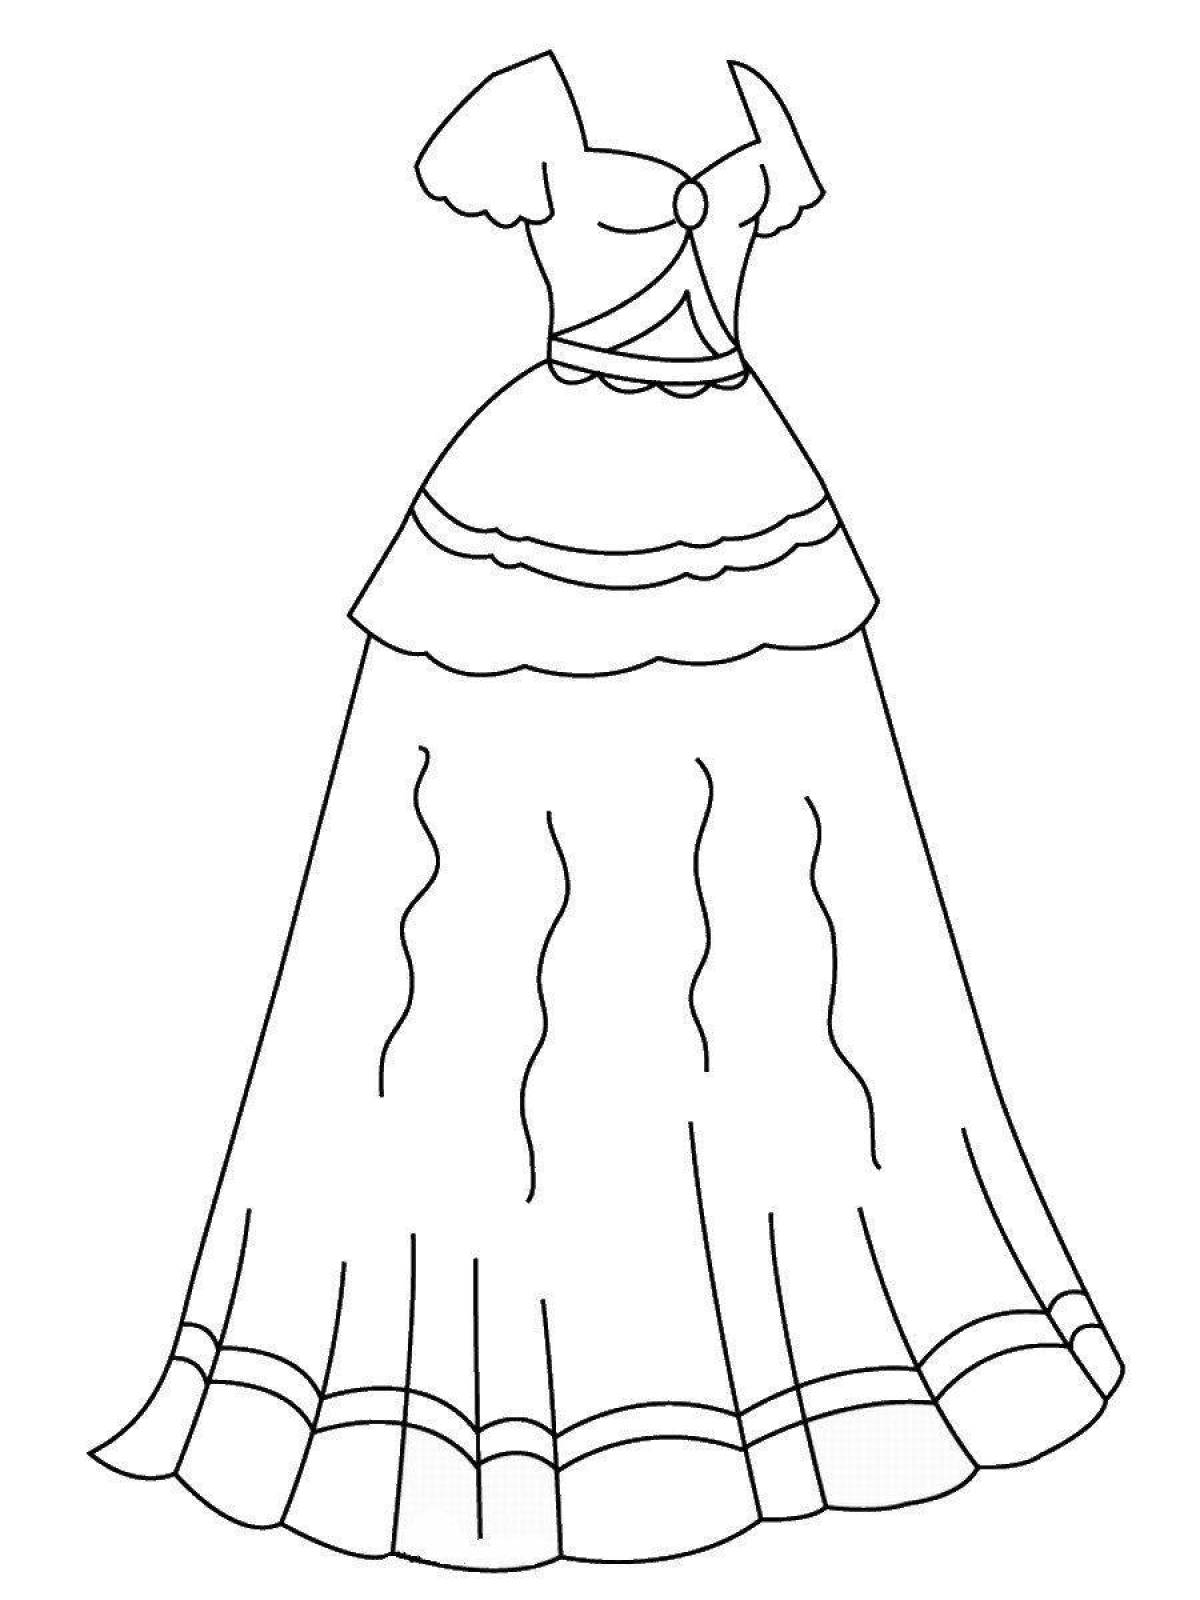 Sparkly dresses coloring book for dolls